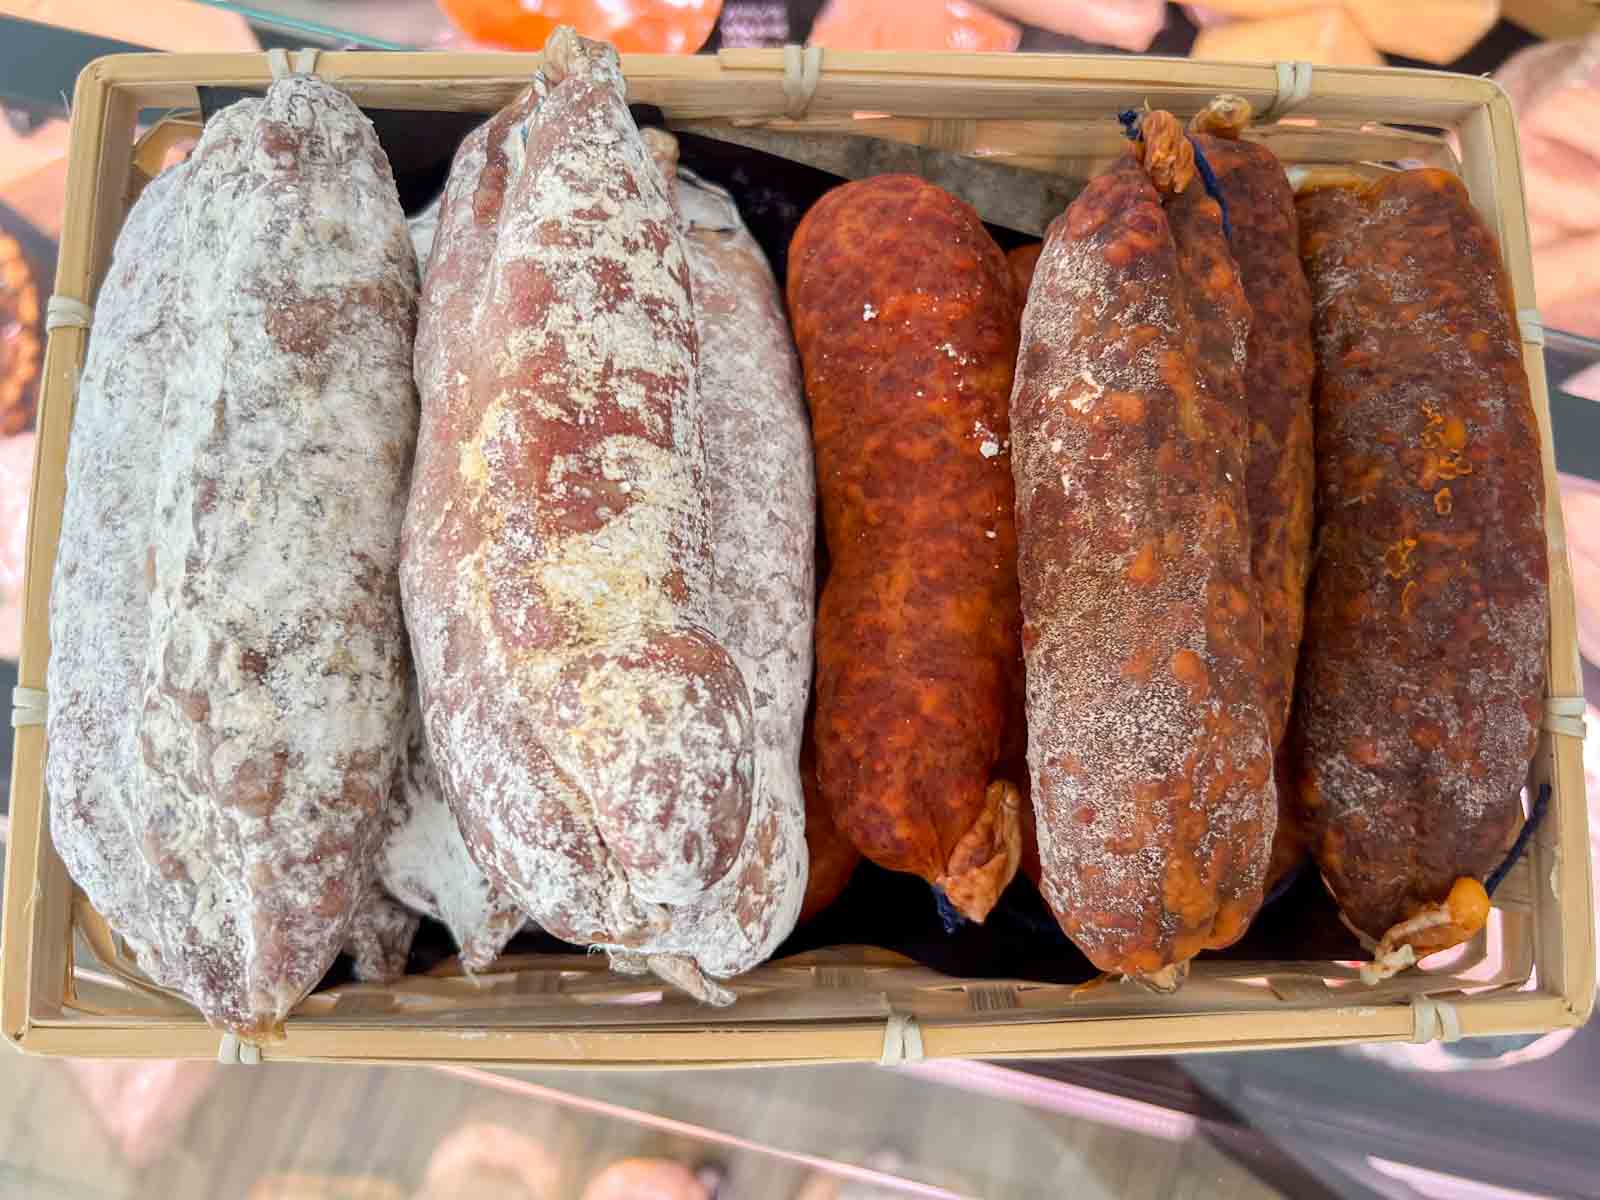 Saucissons at Fromagerie des Ramparts in Laon France